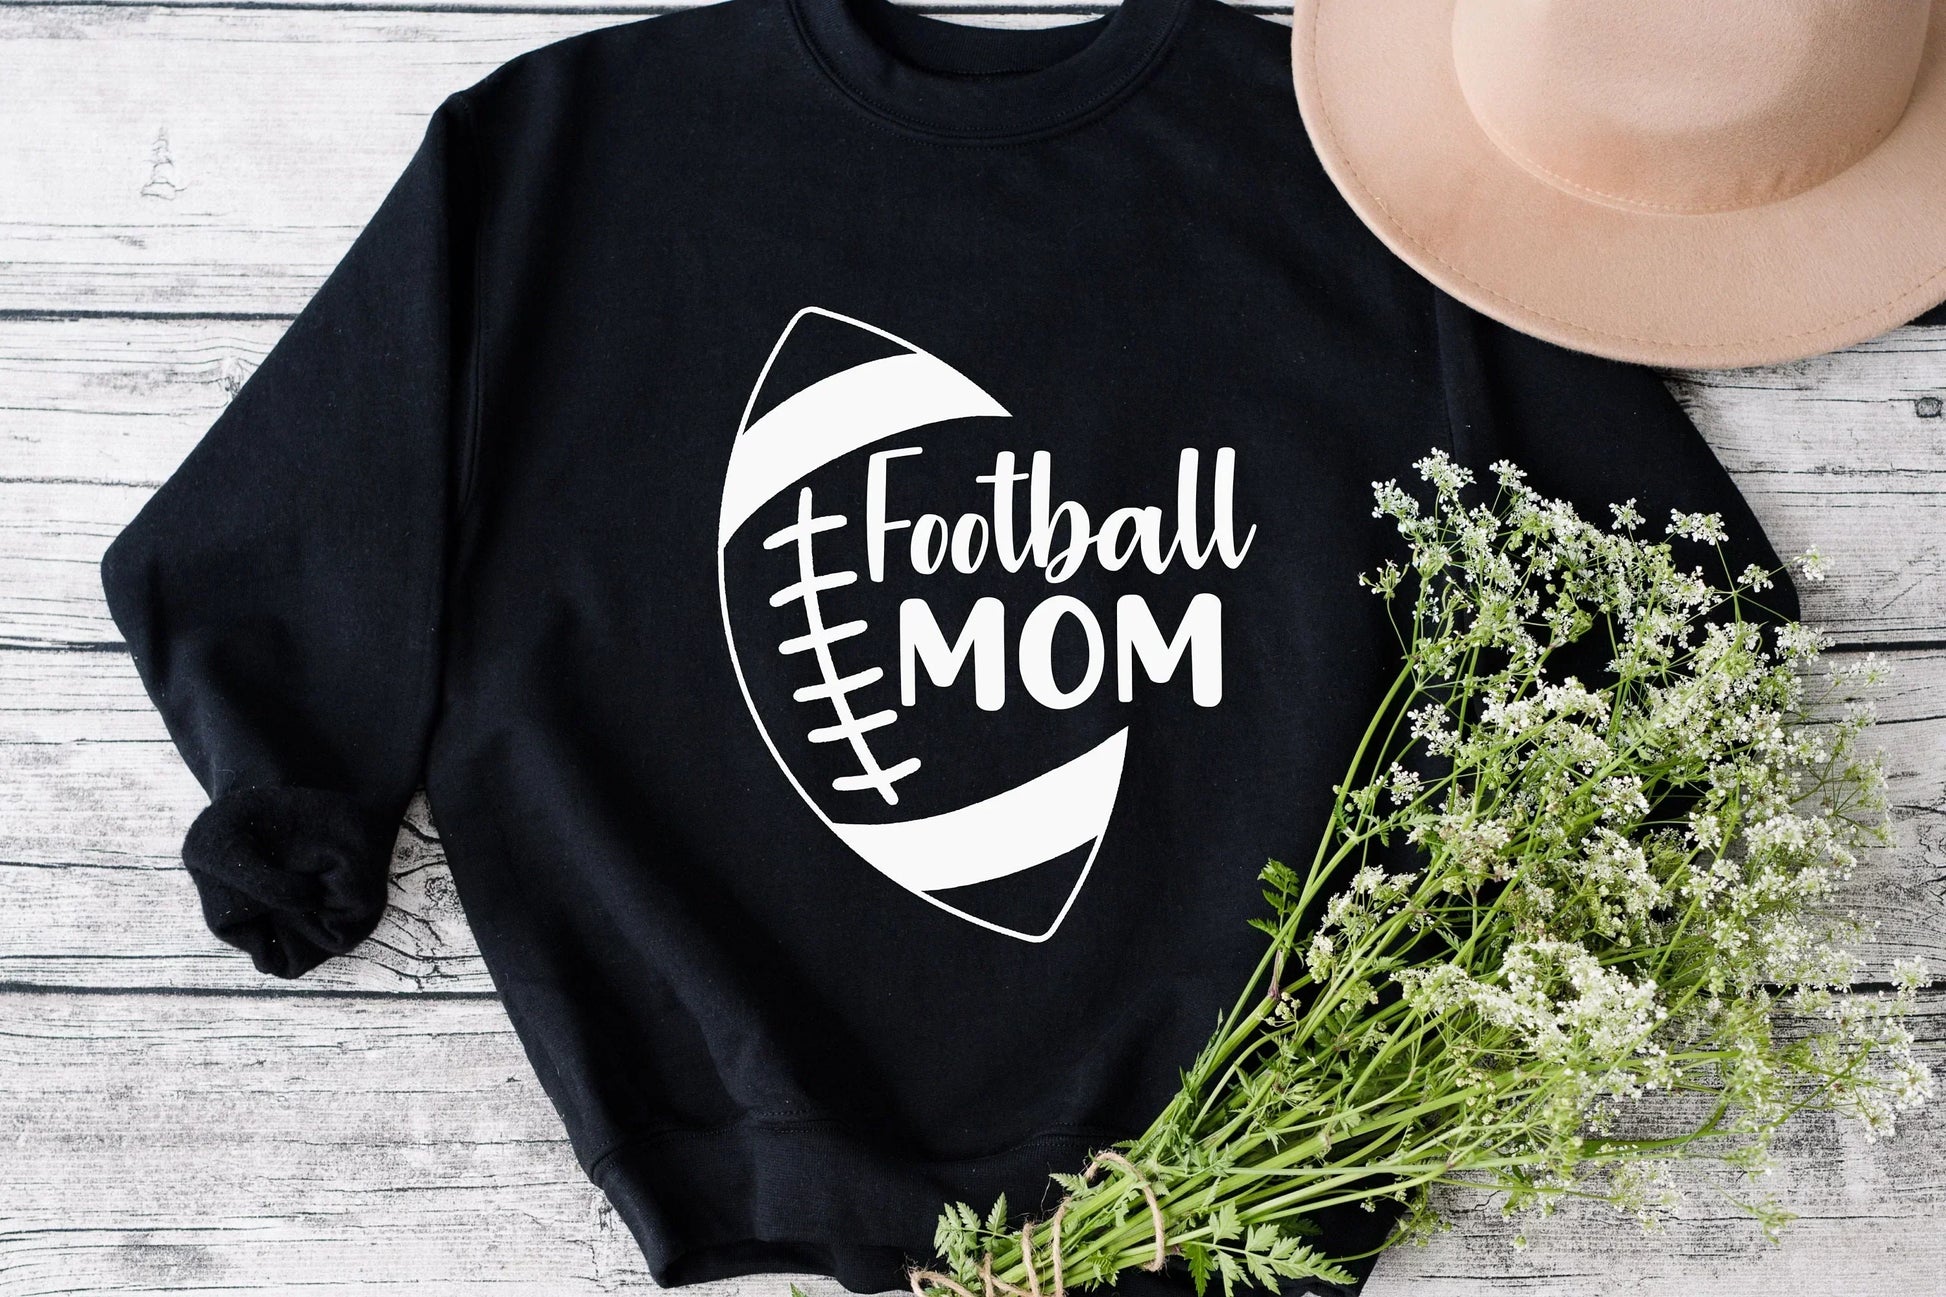 Football mom shirt, Football mom sweatshirt, Football mom hoodie, Boy Mom, Gifts for Mom, Gift for Football Mom, Presents for Mom,